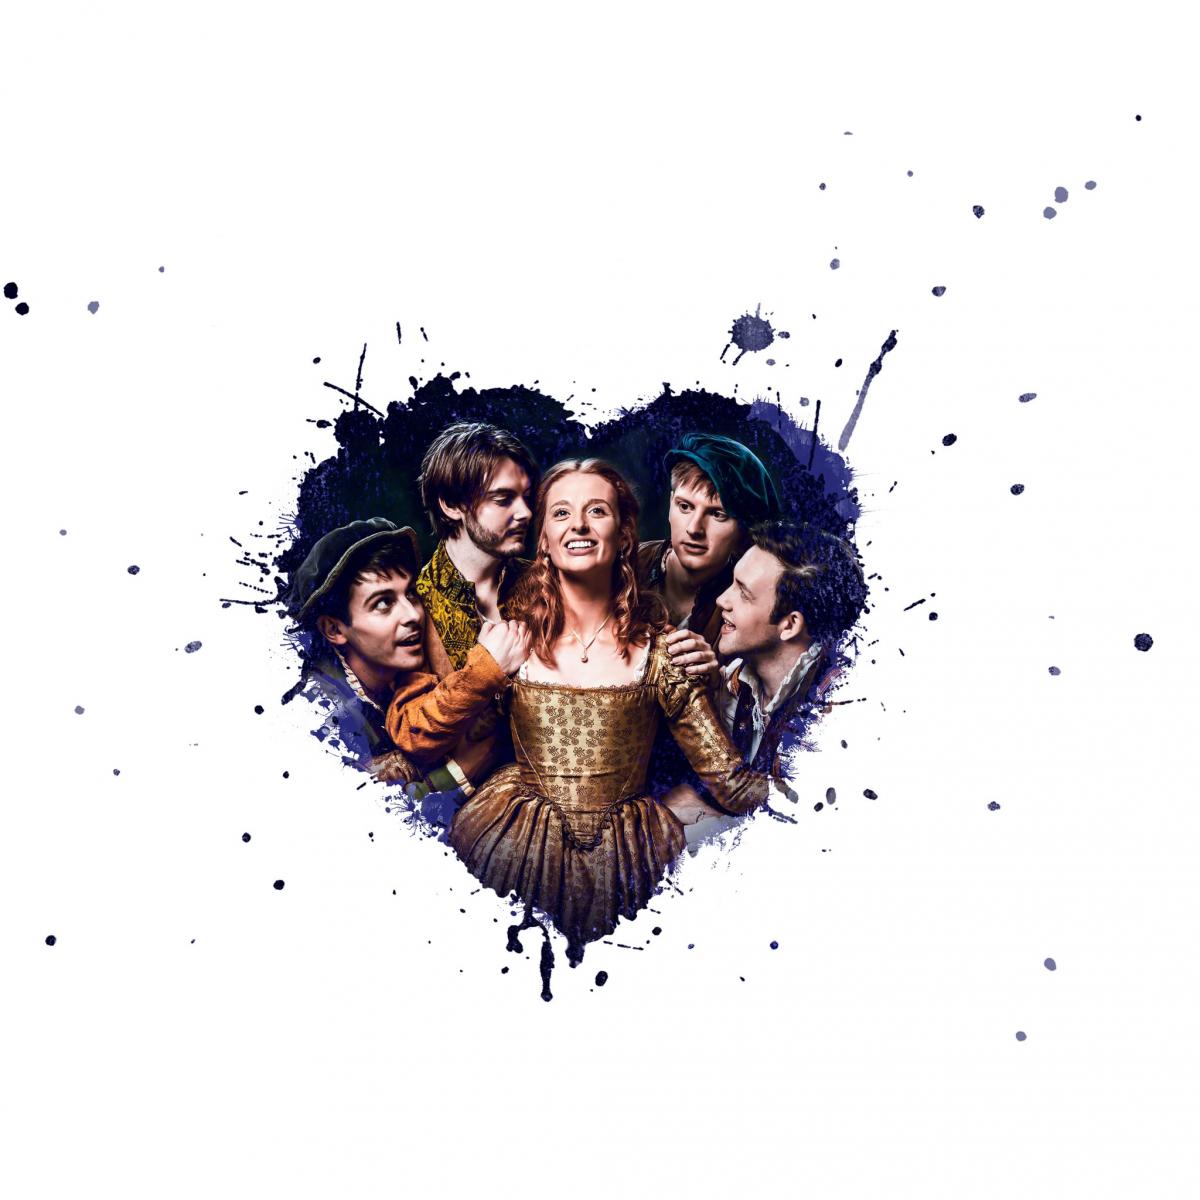 A brand new production of the hit West End play 'Shakespeare in Love' comes to Oxford